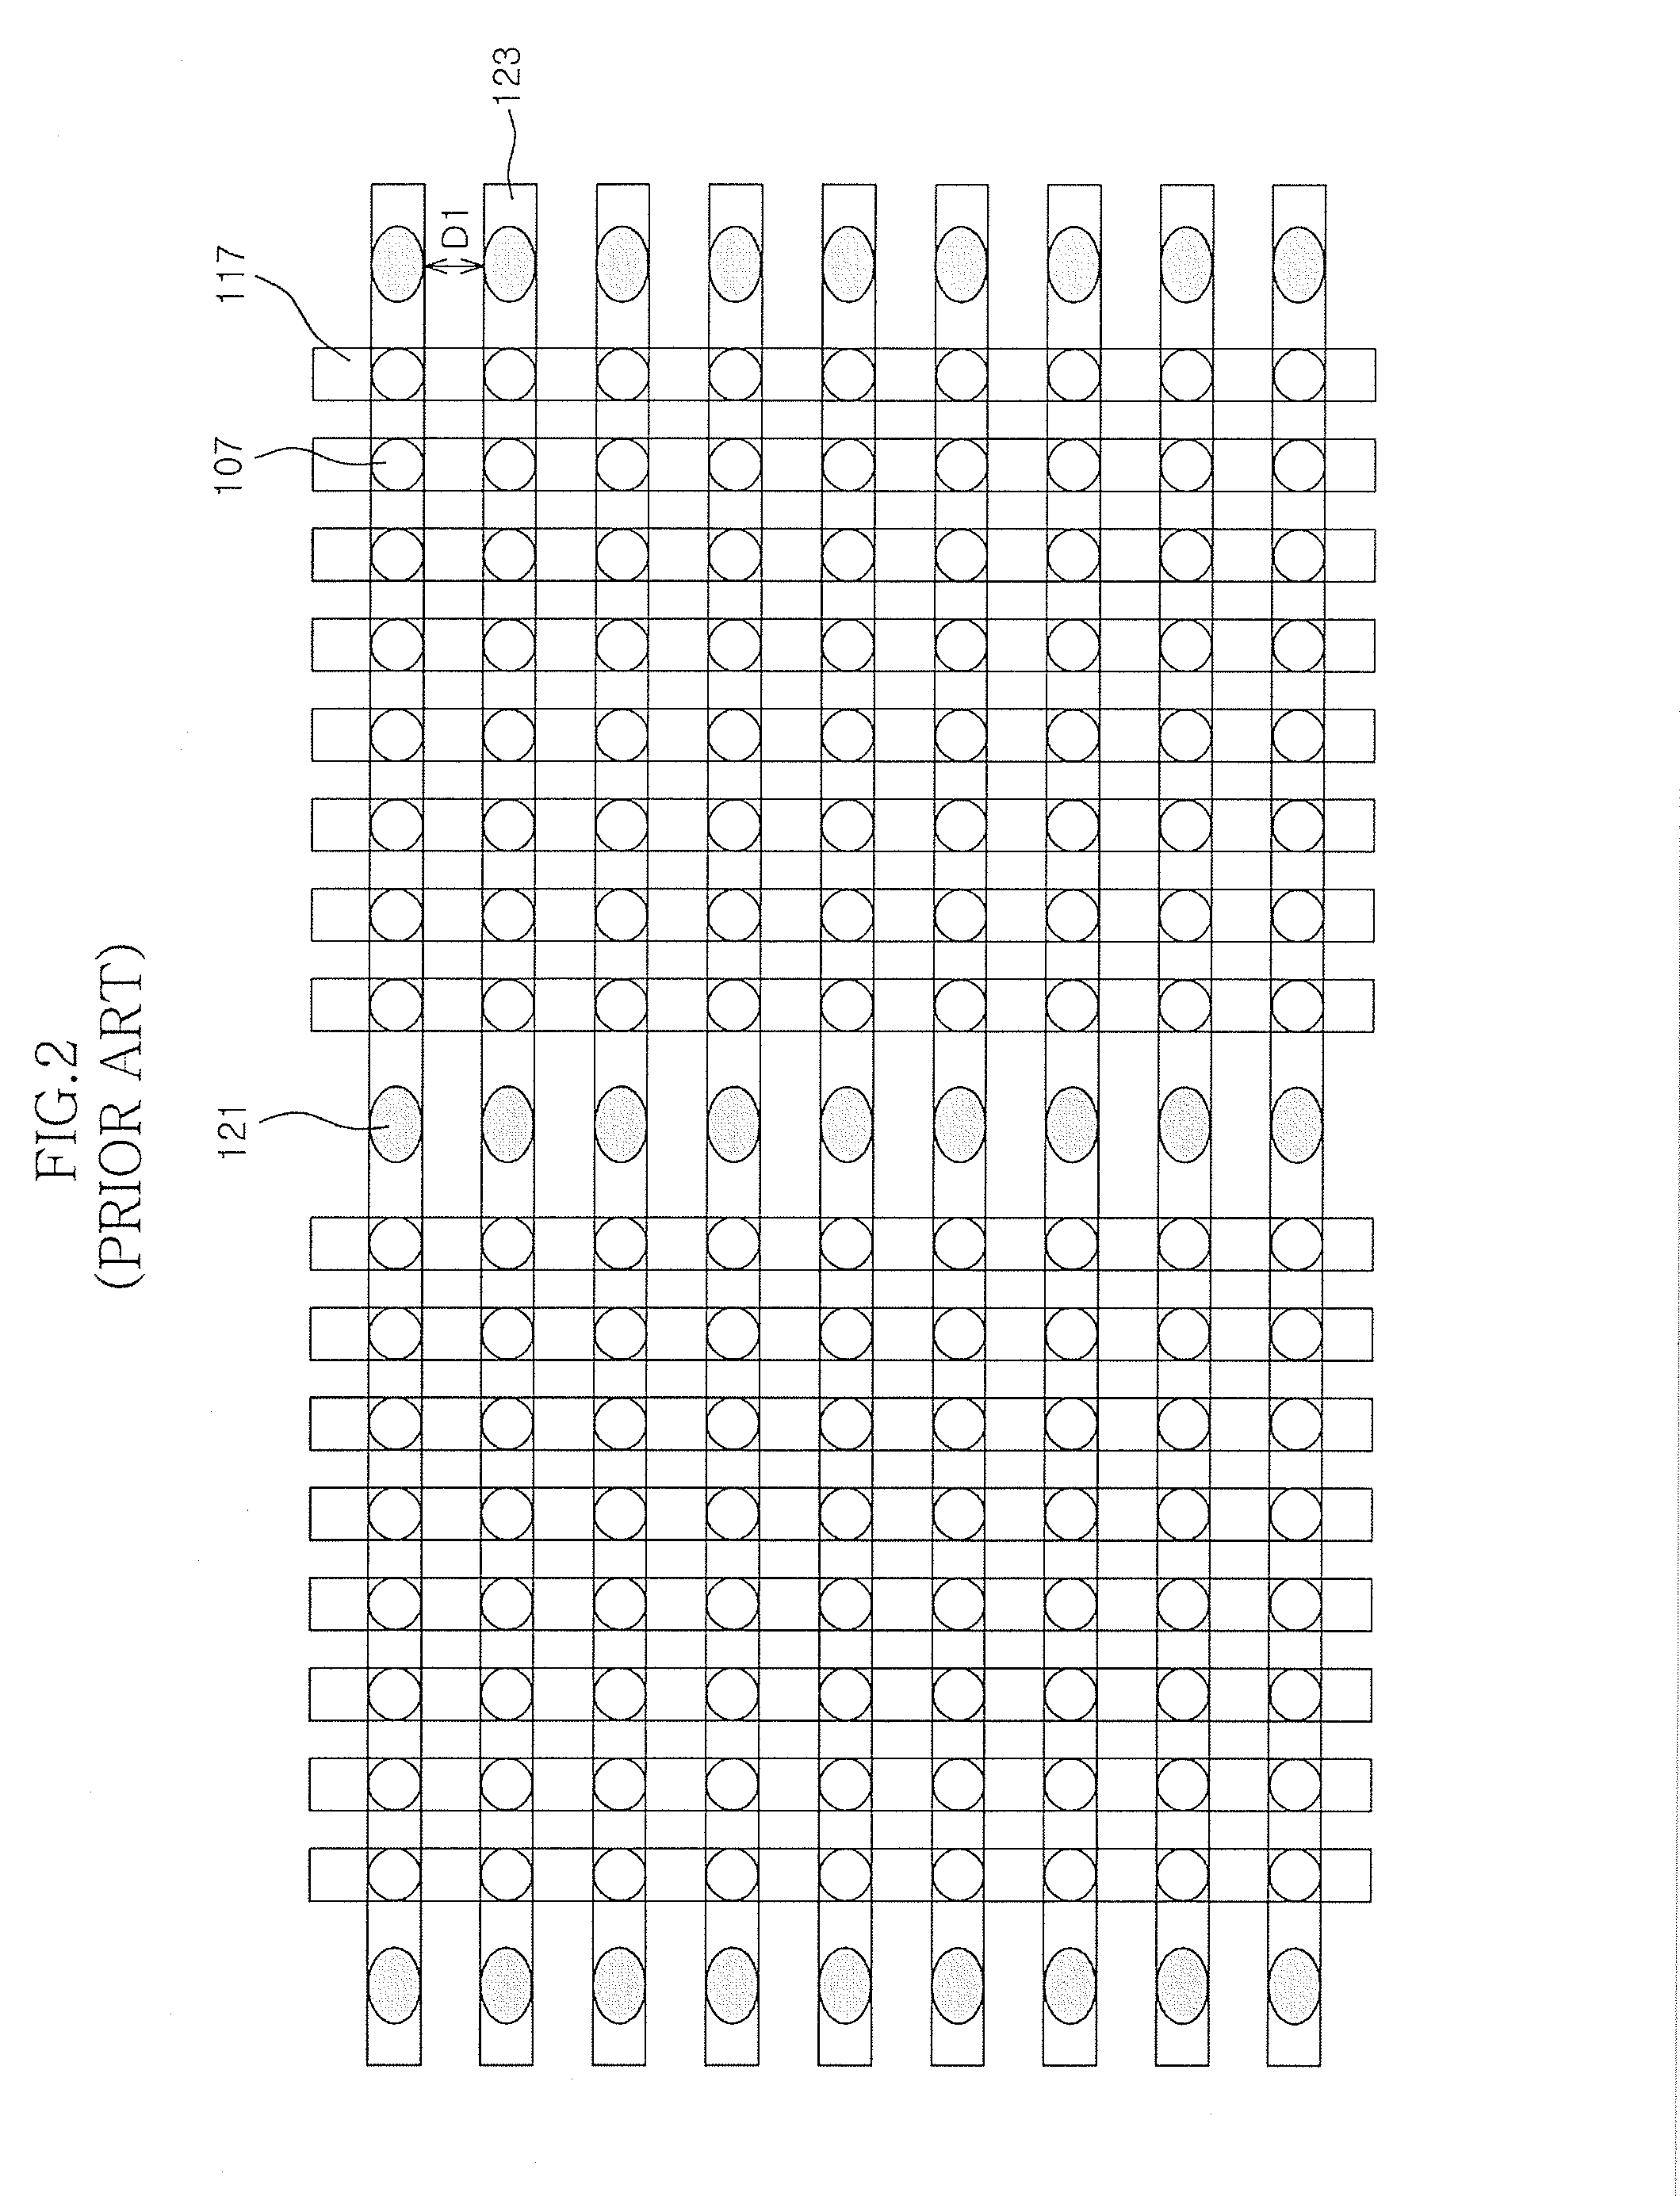 Phase change memory device with alternating adjacent conduction contacts and fabrication method thereof